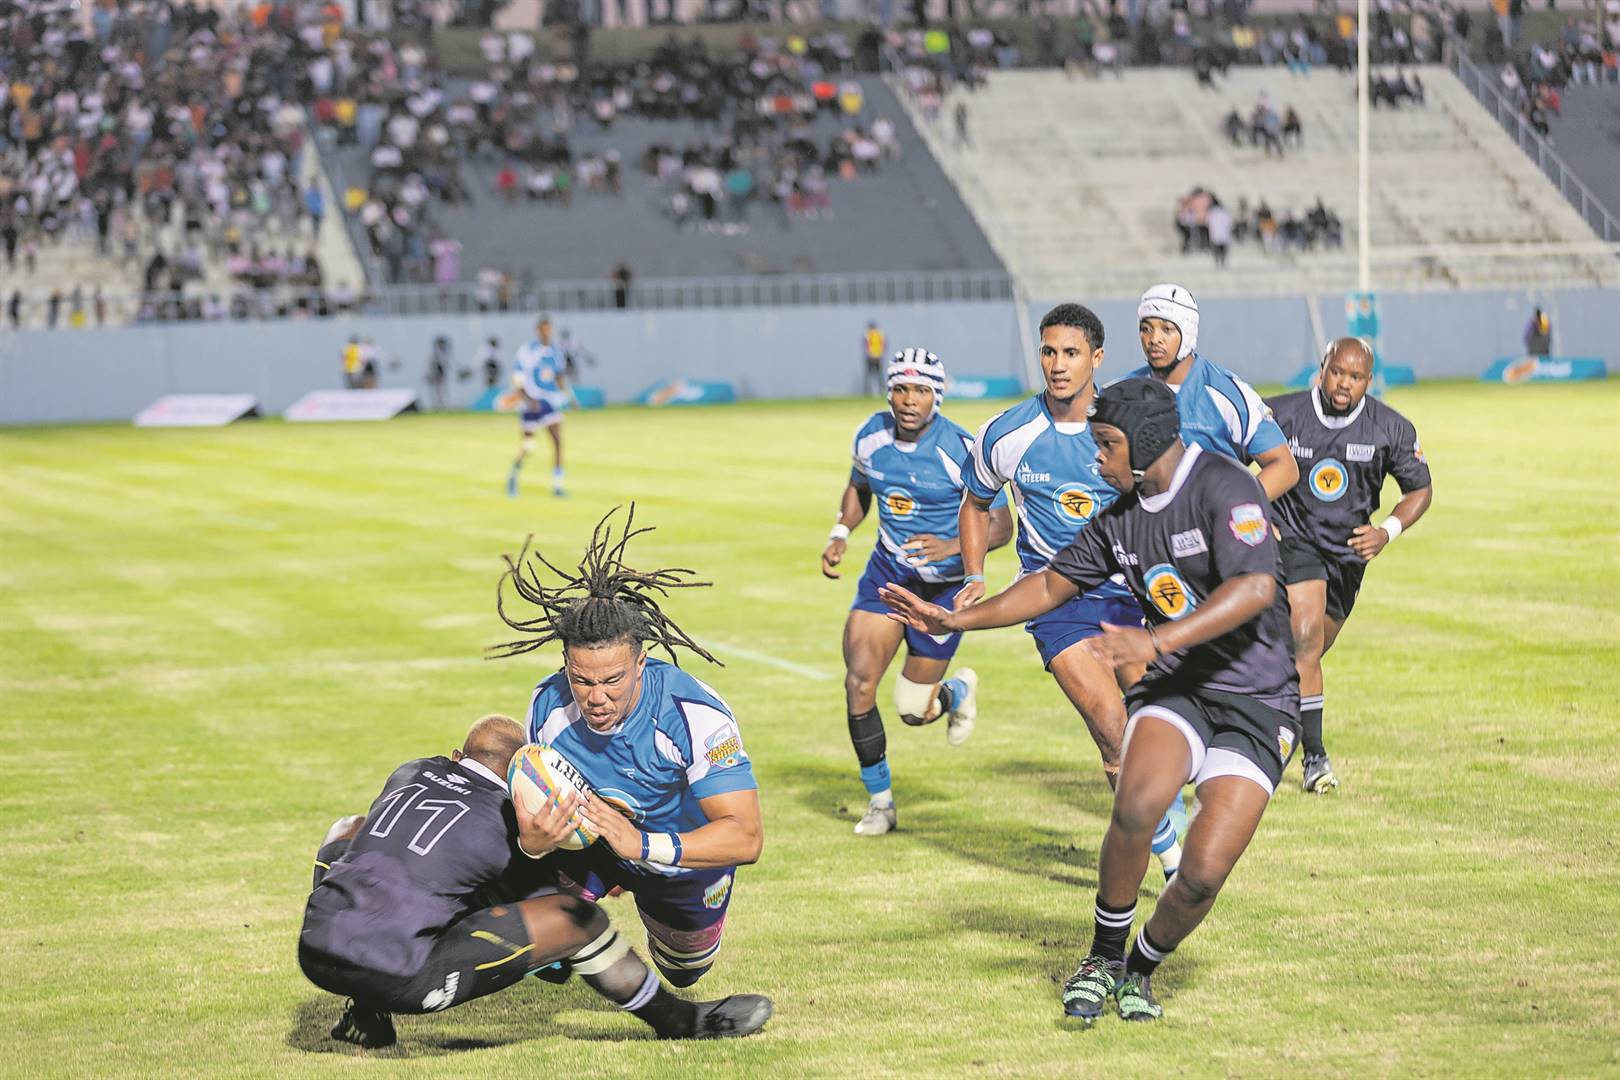 The Cape Peninsula University of Technology maintained their winning start to the Varsity Shield competition by beating Walter Sisulu University 28-13 in Mthatha on Thursday 23 February.PHOTO: ASEM ENGAGE